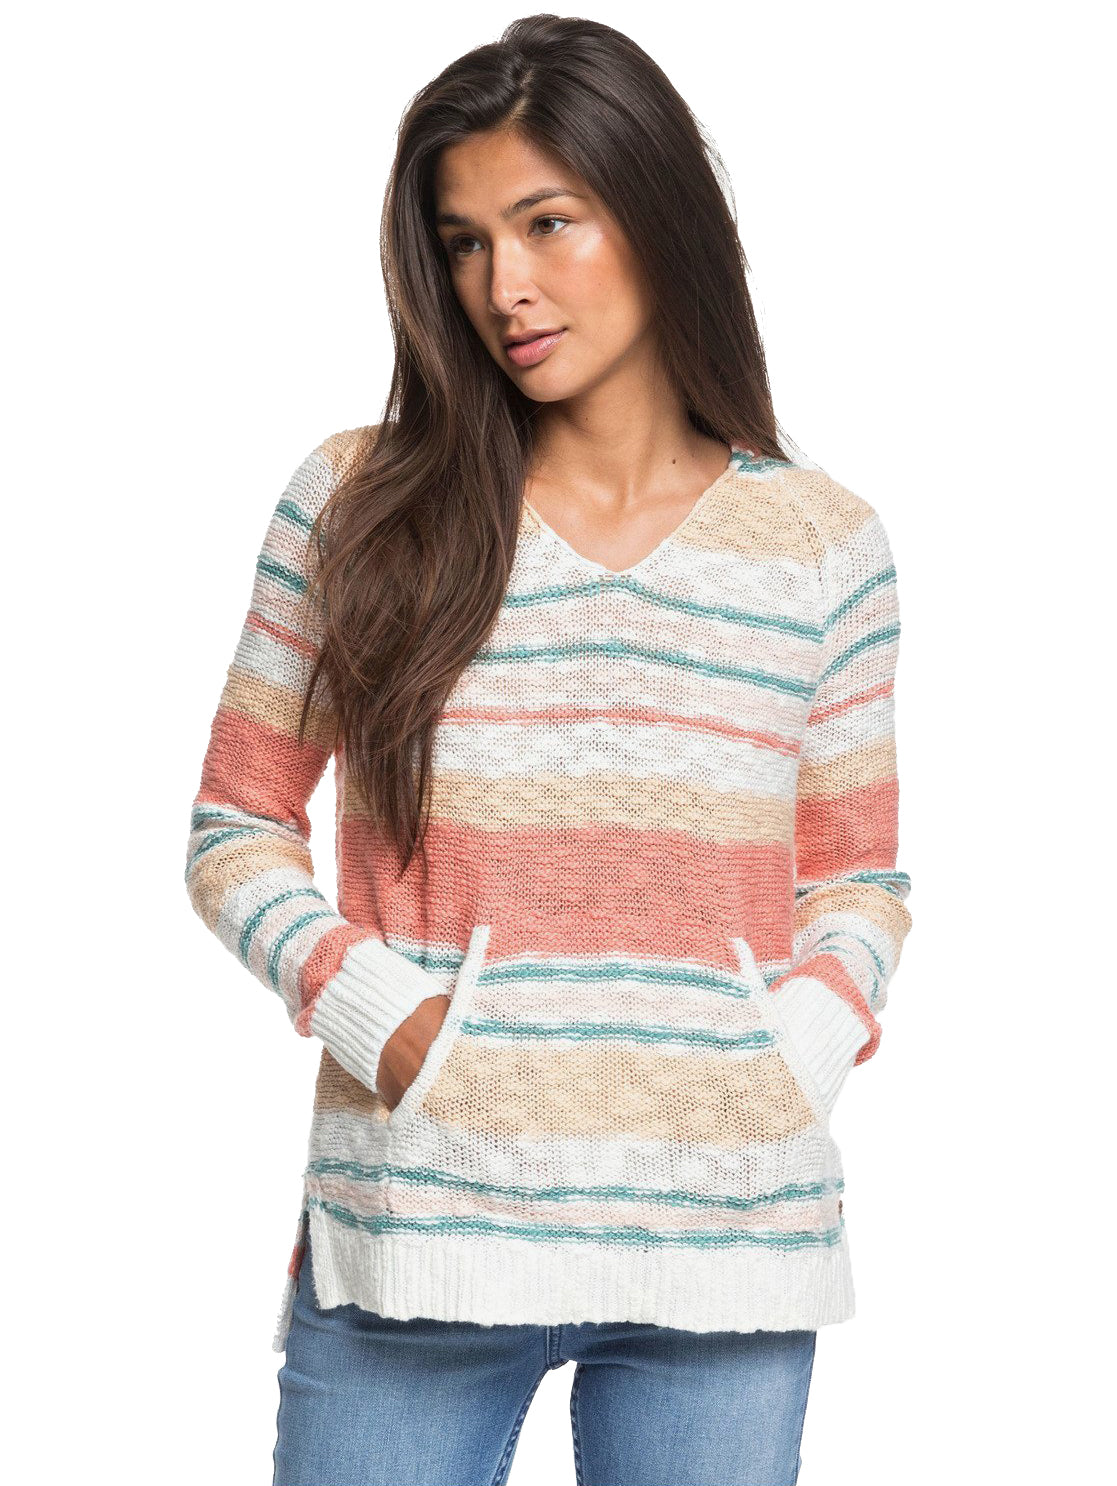 Roxy Airport Vibes Stripe Sweater XWNW S